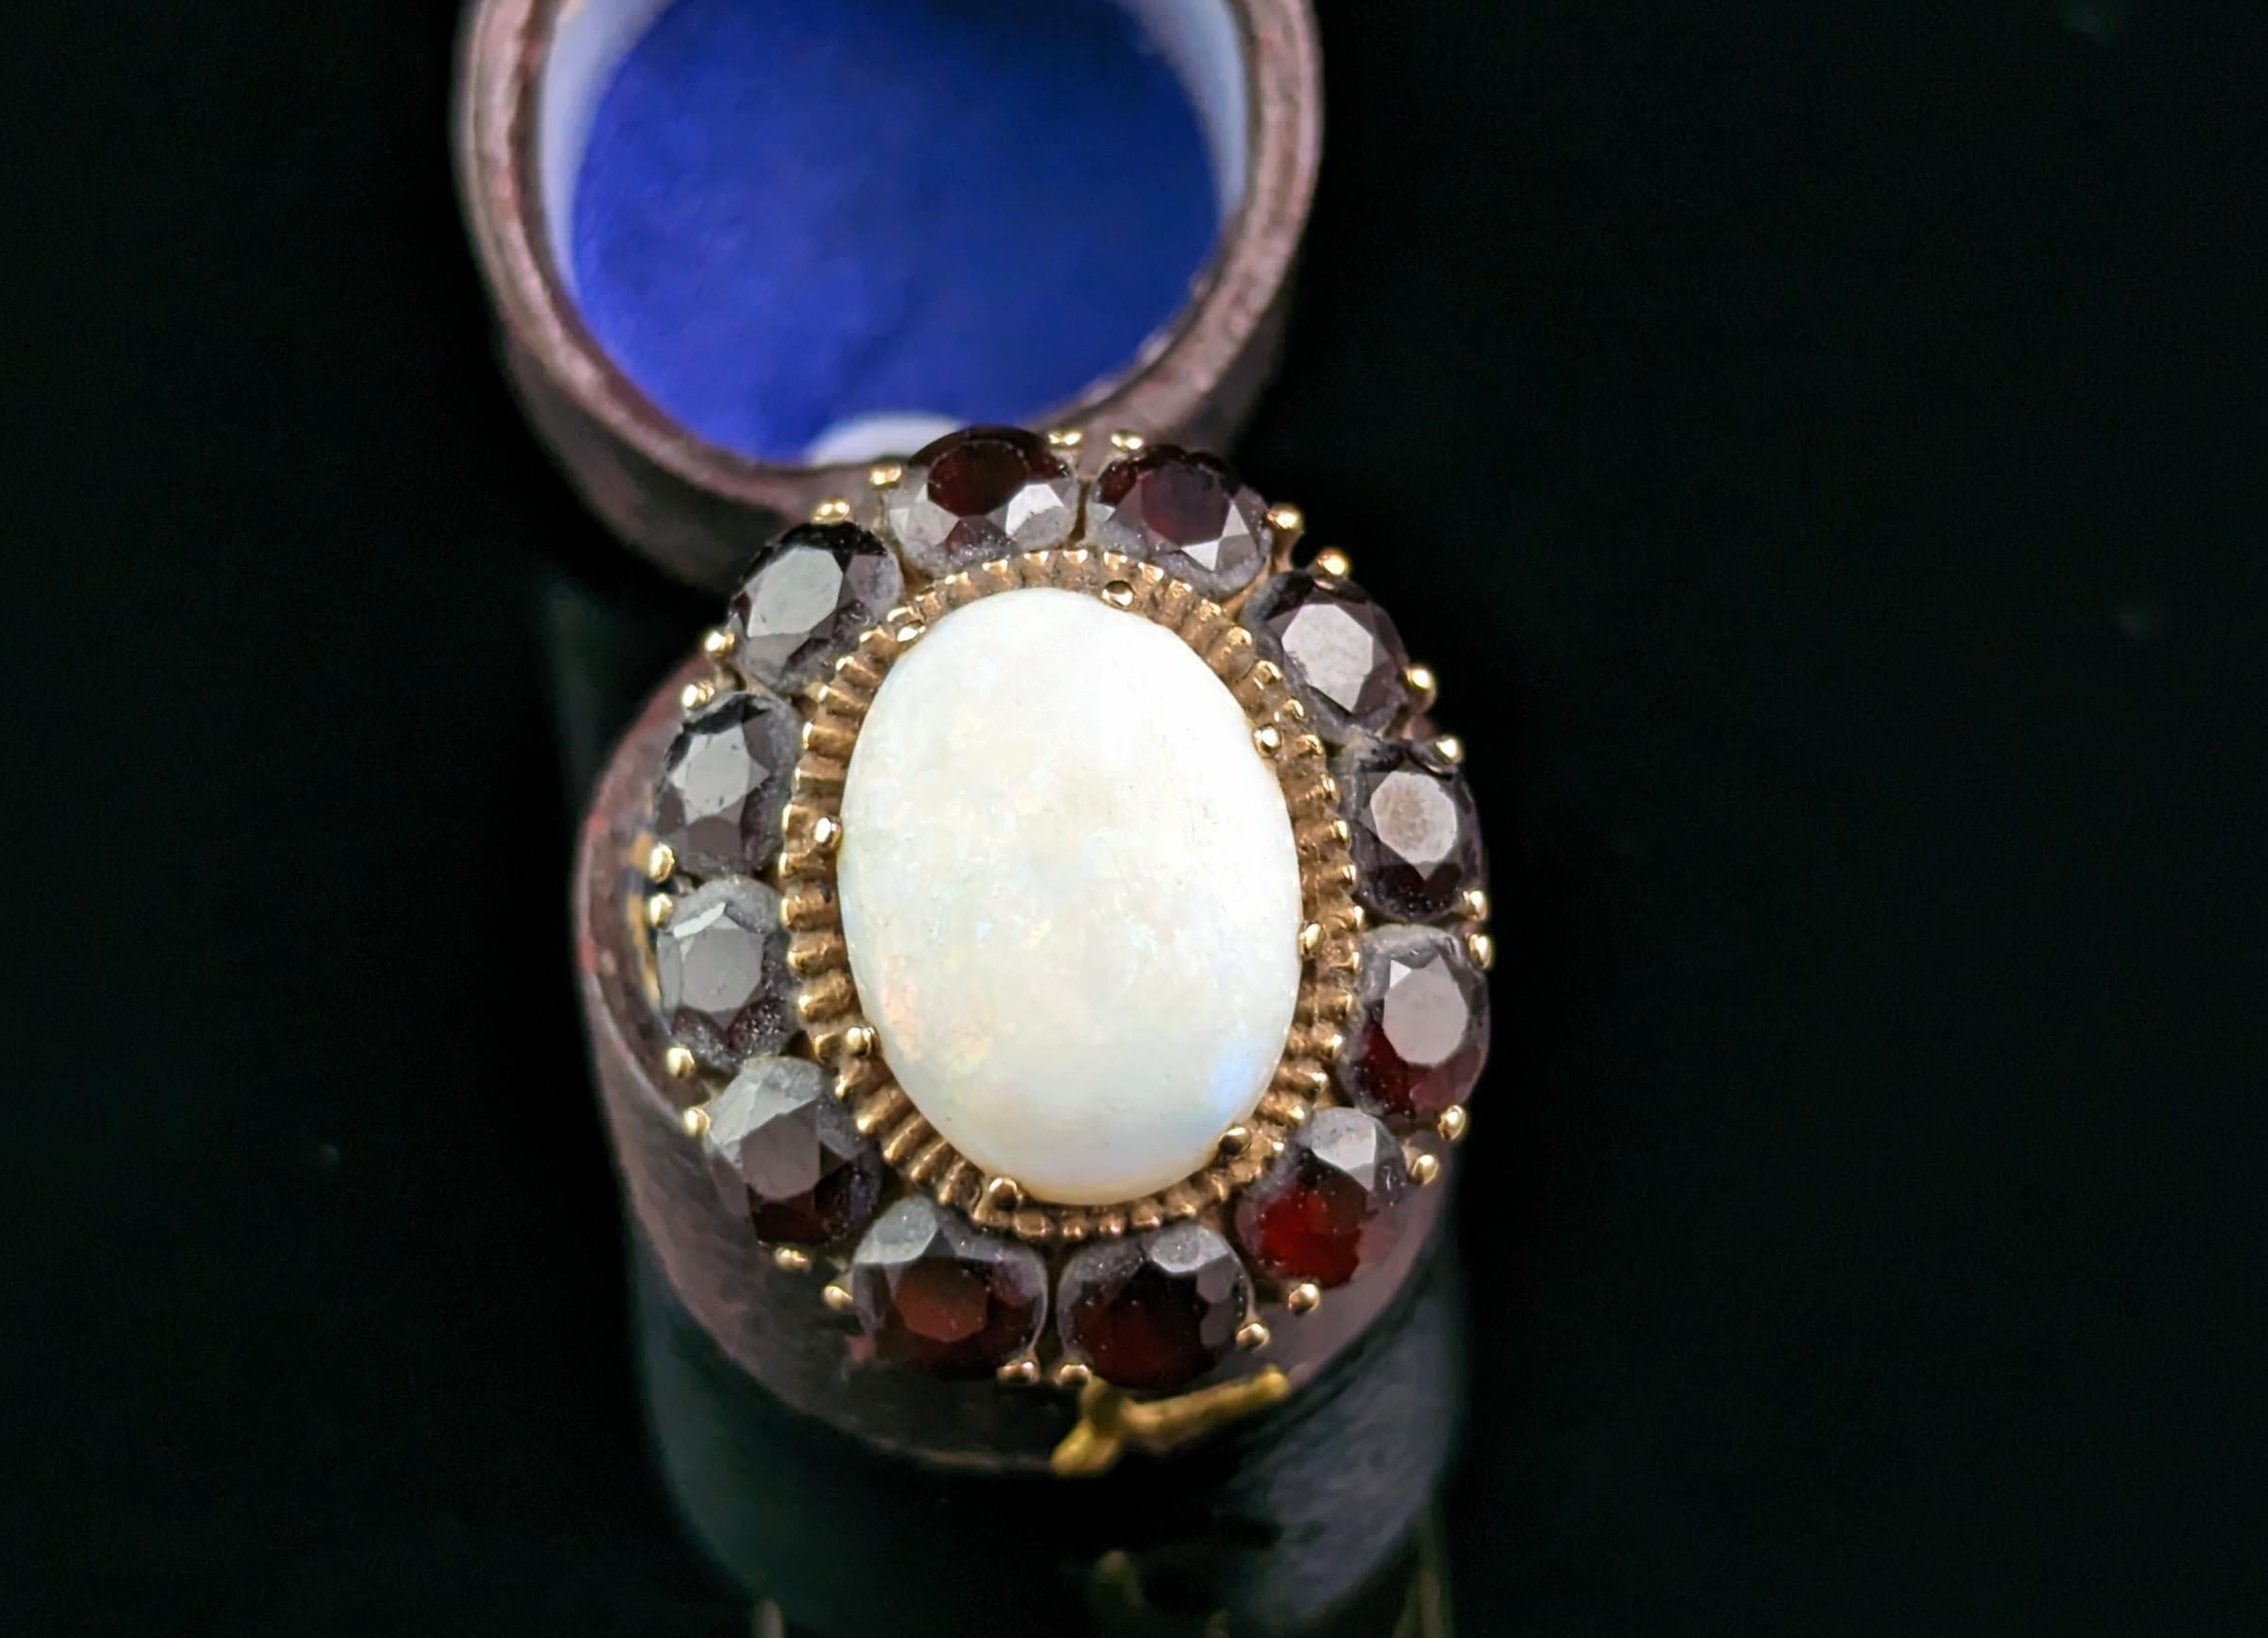 A huge vintage Opal and Garnet cluster ring in 9ct gold.

This cluster ring is super sized and is a real statement piece, definitely one that was designed to be noticed.

It is crafted in 9ct yellow gold with a smooth polished band and lovely